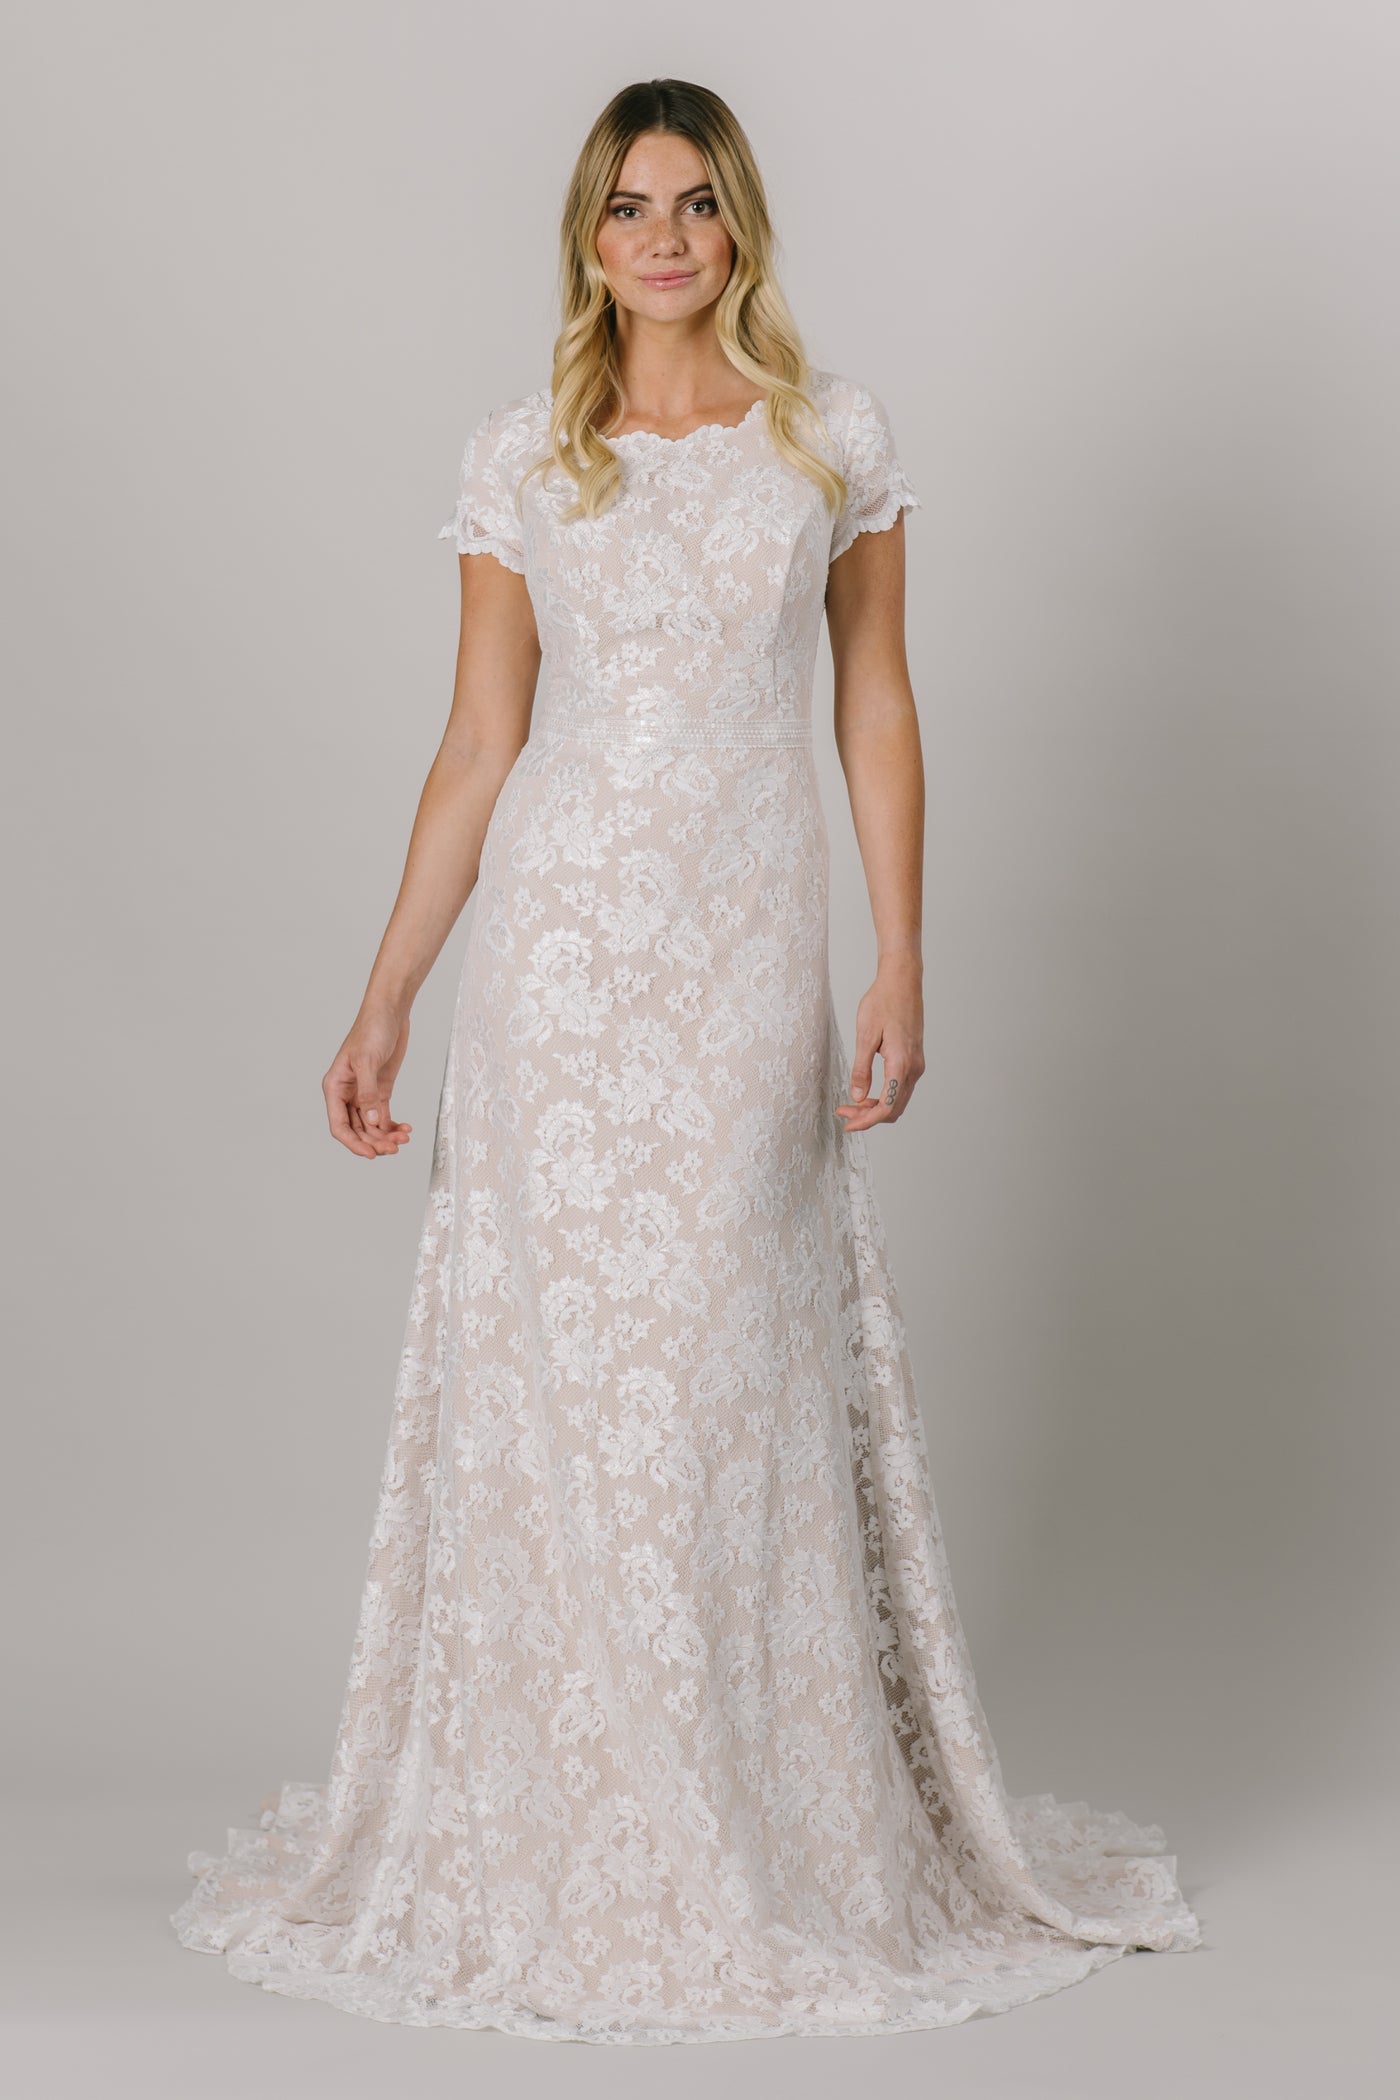 This fitted modest wedding dress is made with a delicate lace pattern and features a fun lace belt. The short illusion sleeves and neckline have the cutest little ruffle. Available in Ivory and Ivory/Cappuccino (as pictured).   ﻿Style Love: This dress is part of our brand new, exclusive LatterDayBride wedding dress collection.